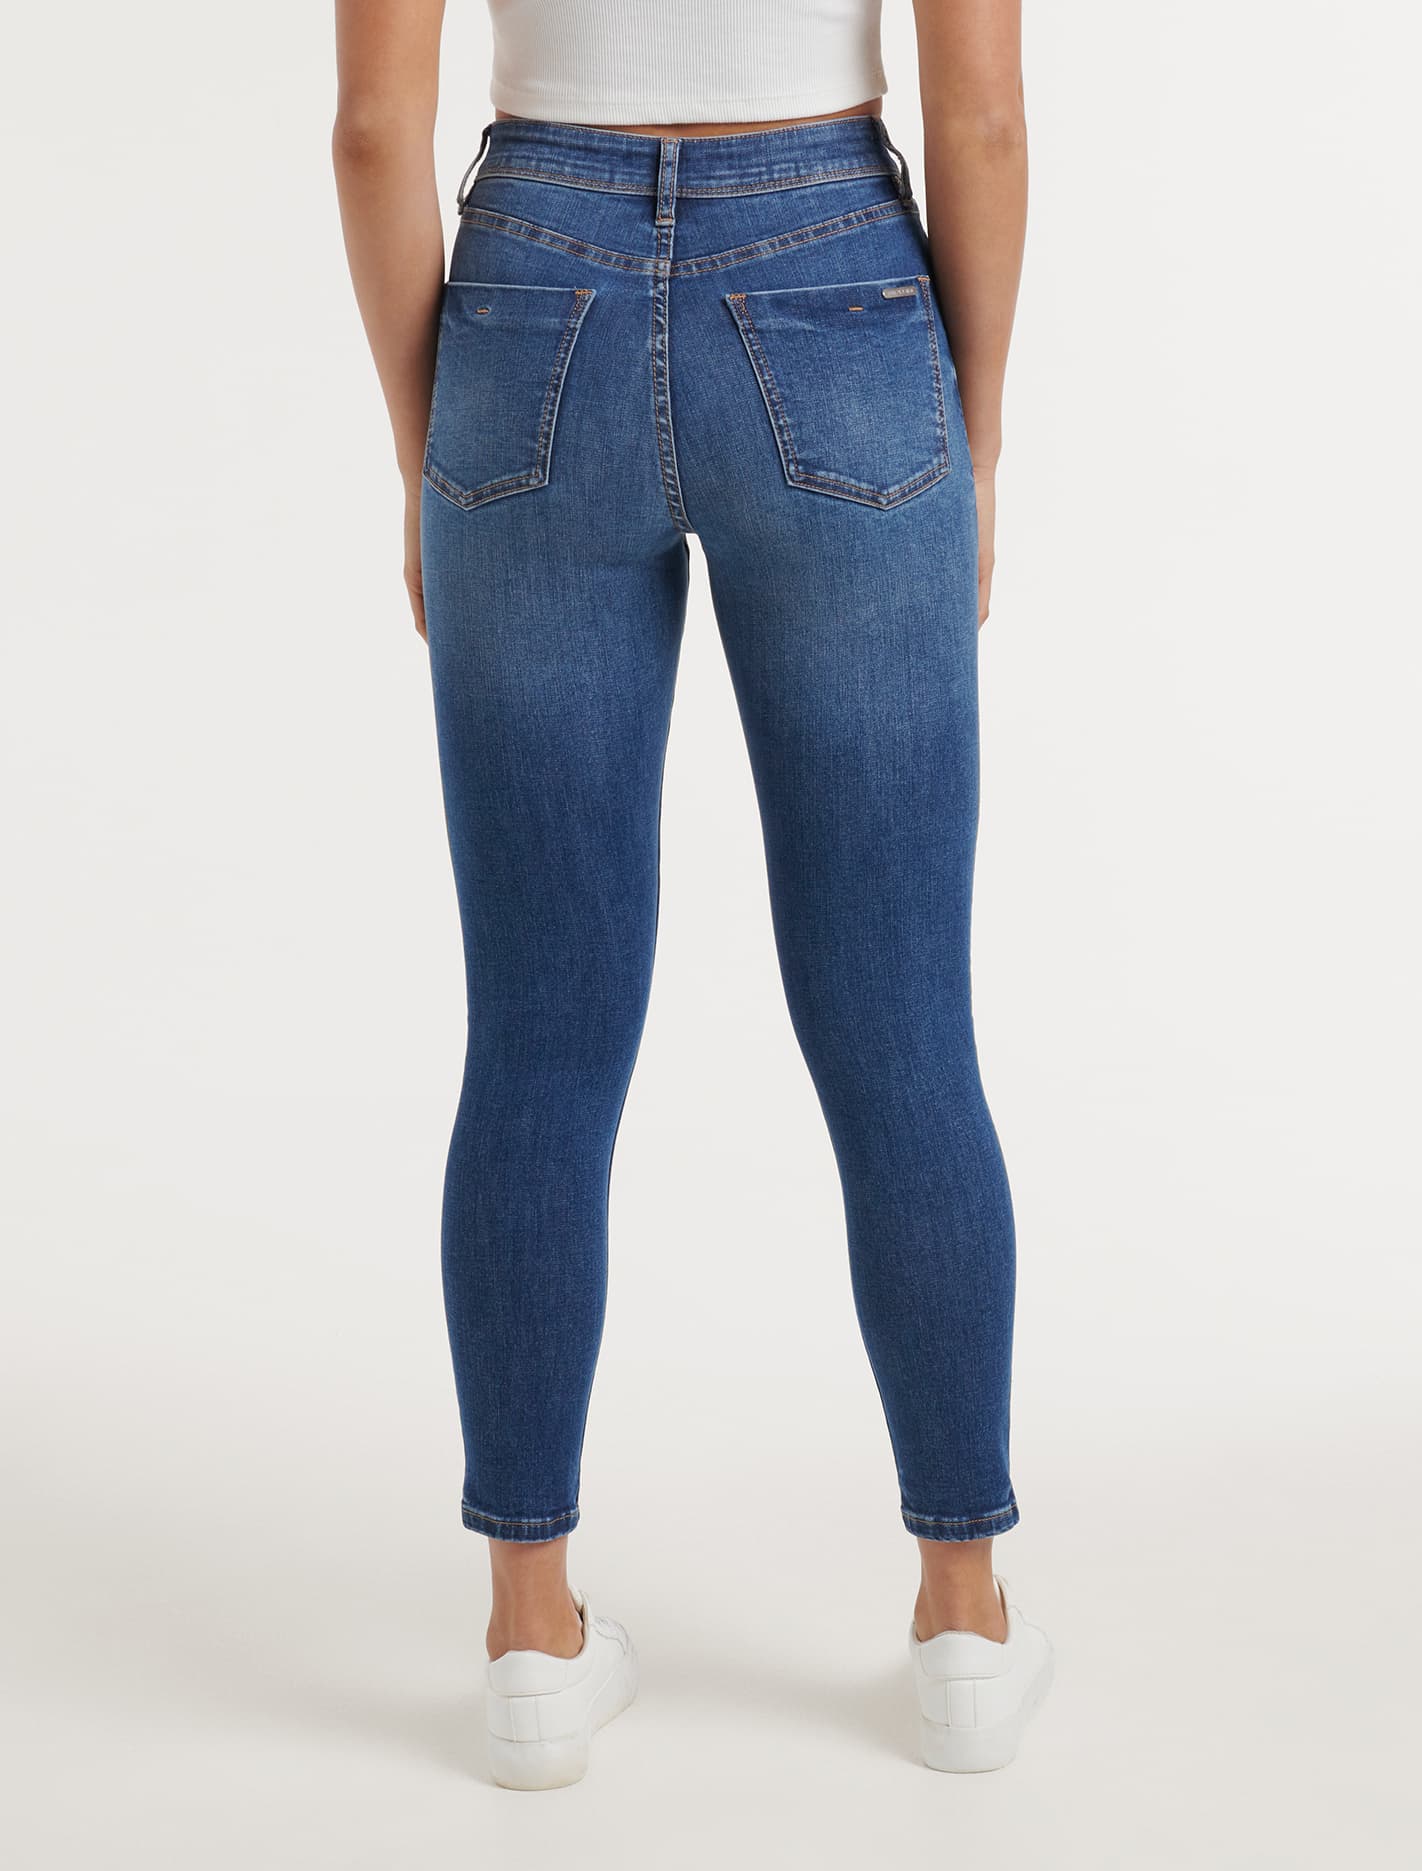 Nala Curvy Mid-Rise Skinny Jeans Scarbourough | Forever New